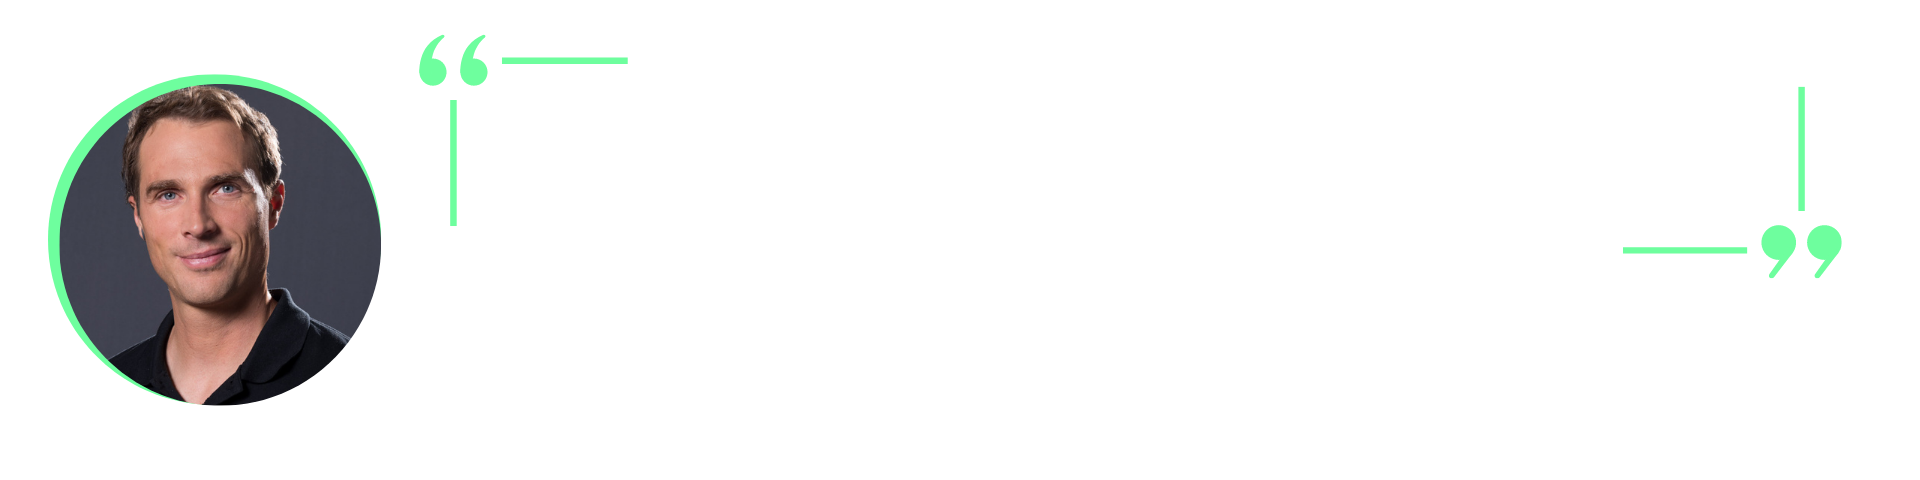 Doctor Vincent Costalat's quotation: "Don't underestimate the need for anchoring because it can be the beginning of a mess."